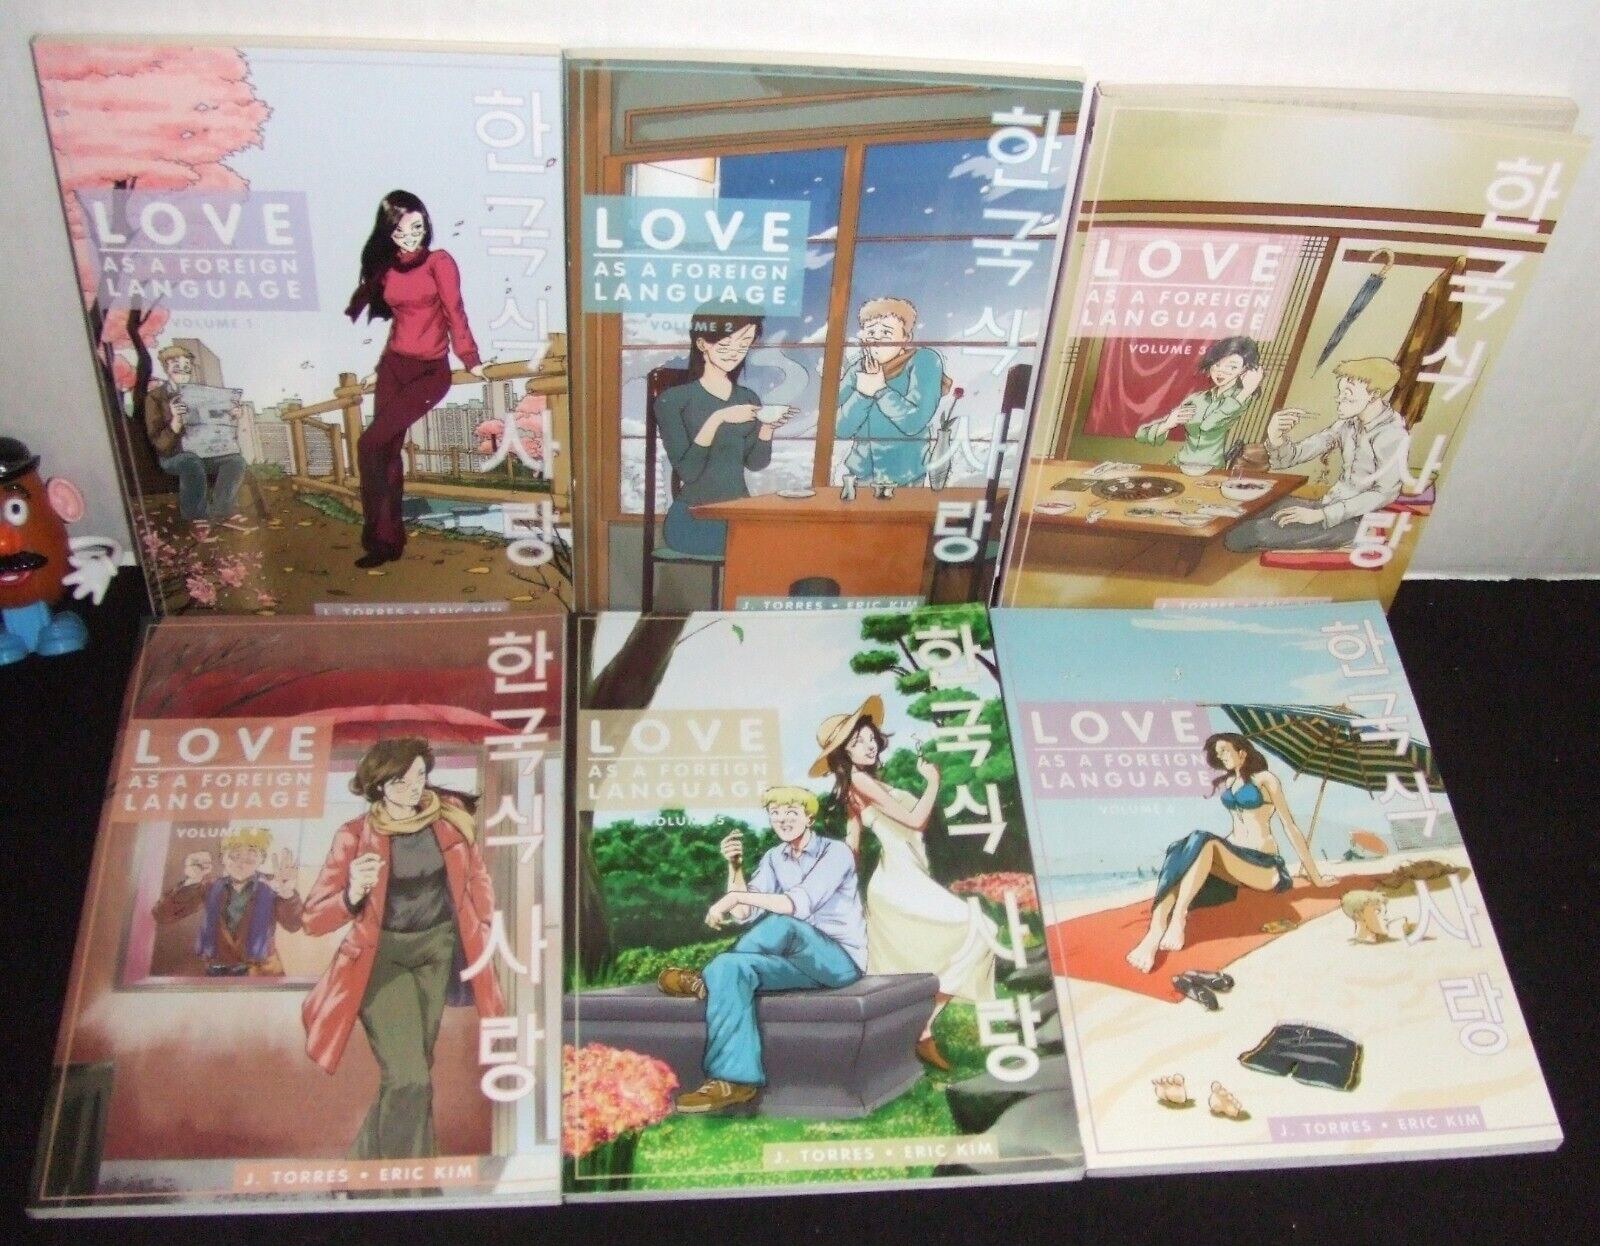 LOVE AS A FOREIGN LANGUAGE ONI DIGEST SOFTCVR SIX BOOK FULL SET VOL #1 2 3 4 5 6